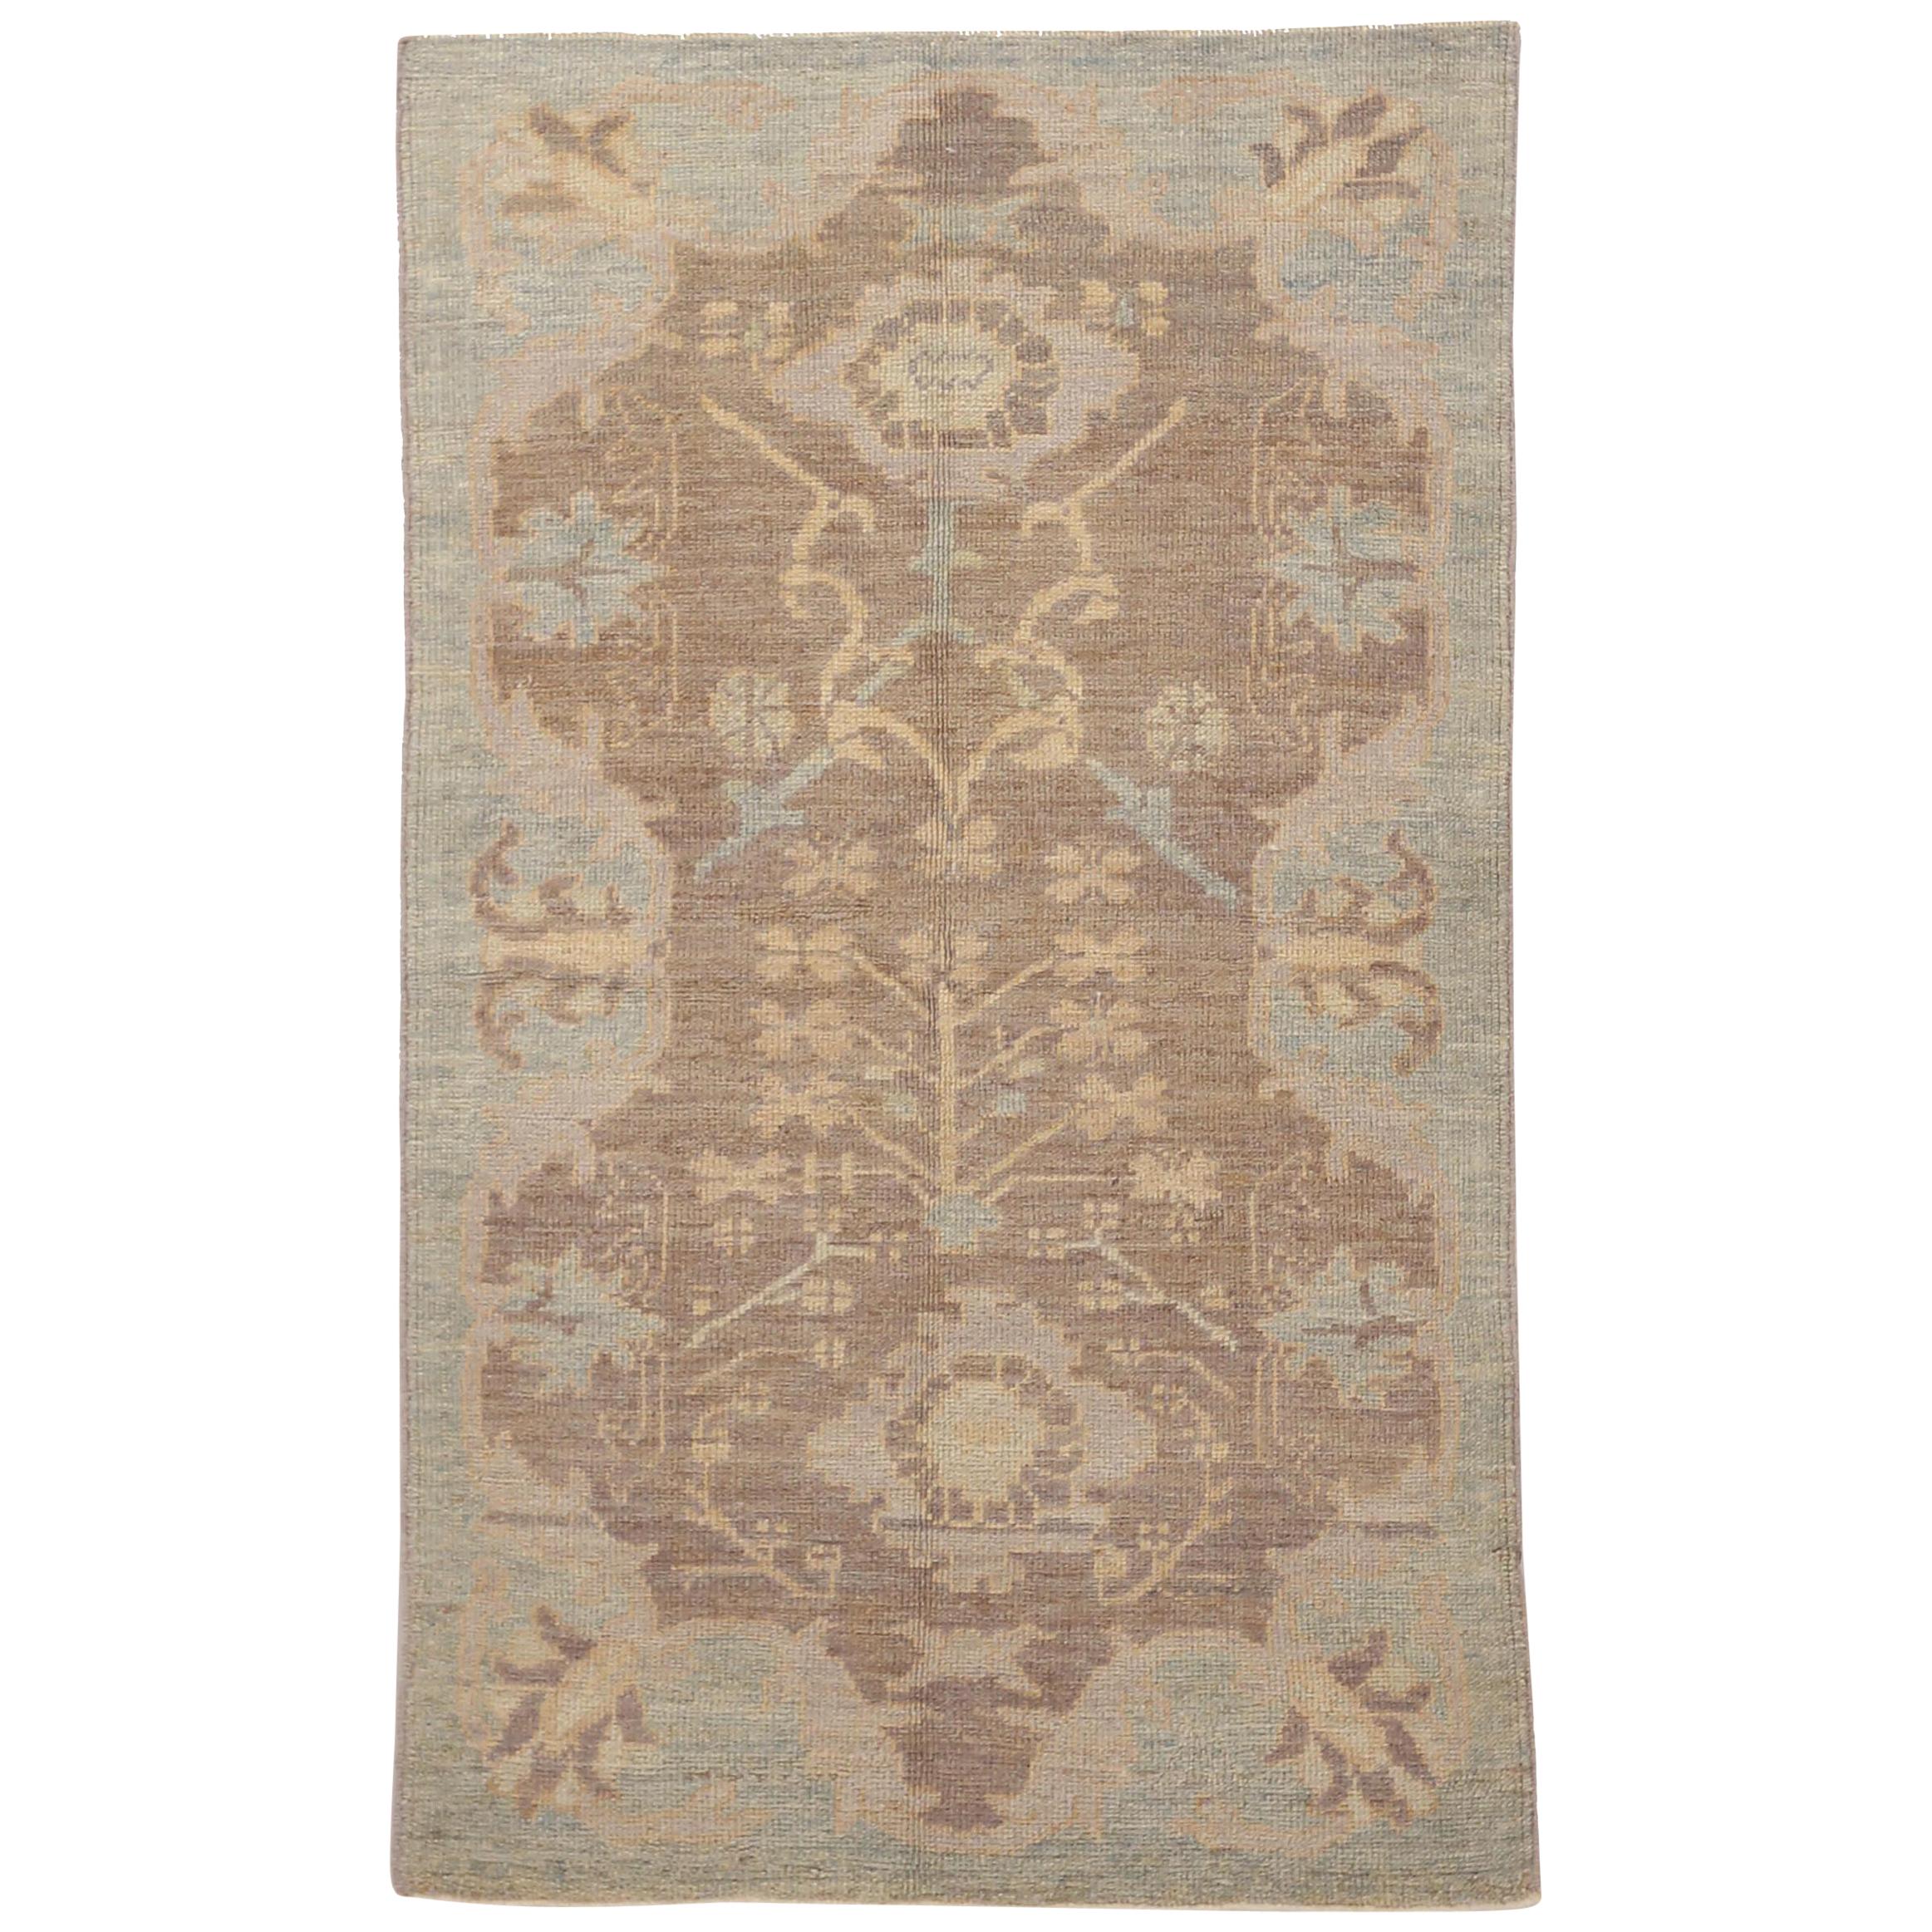 New Persian Oushak Rug with Brown and Blue Floral Design Patterns